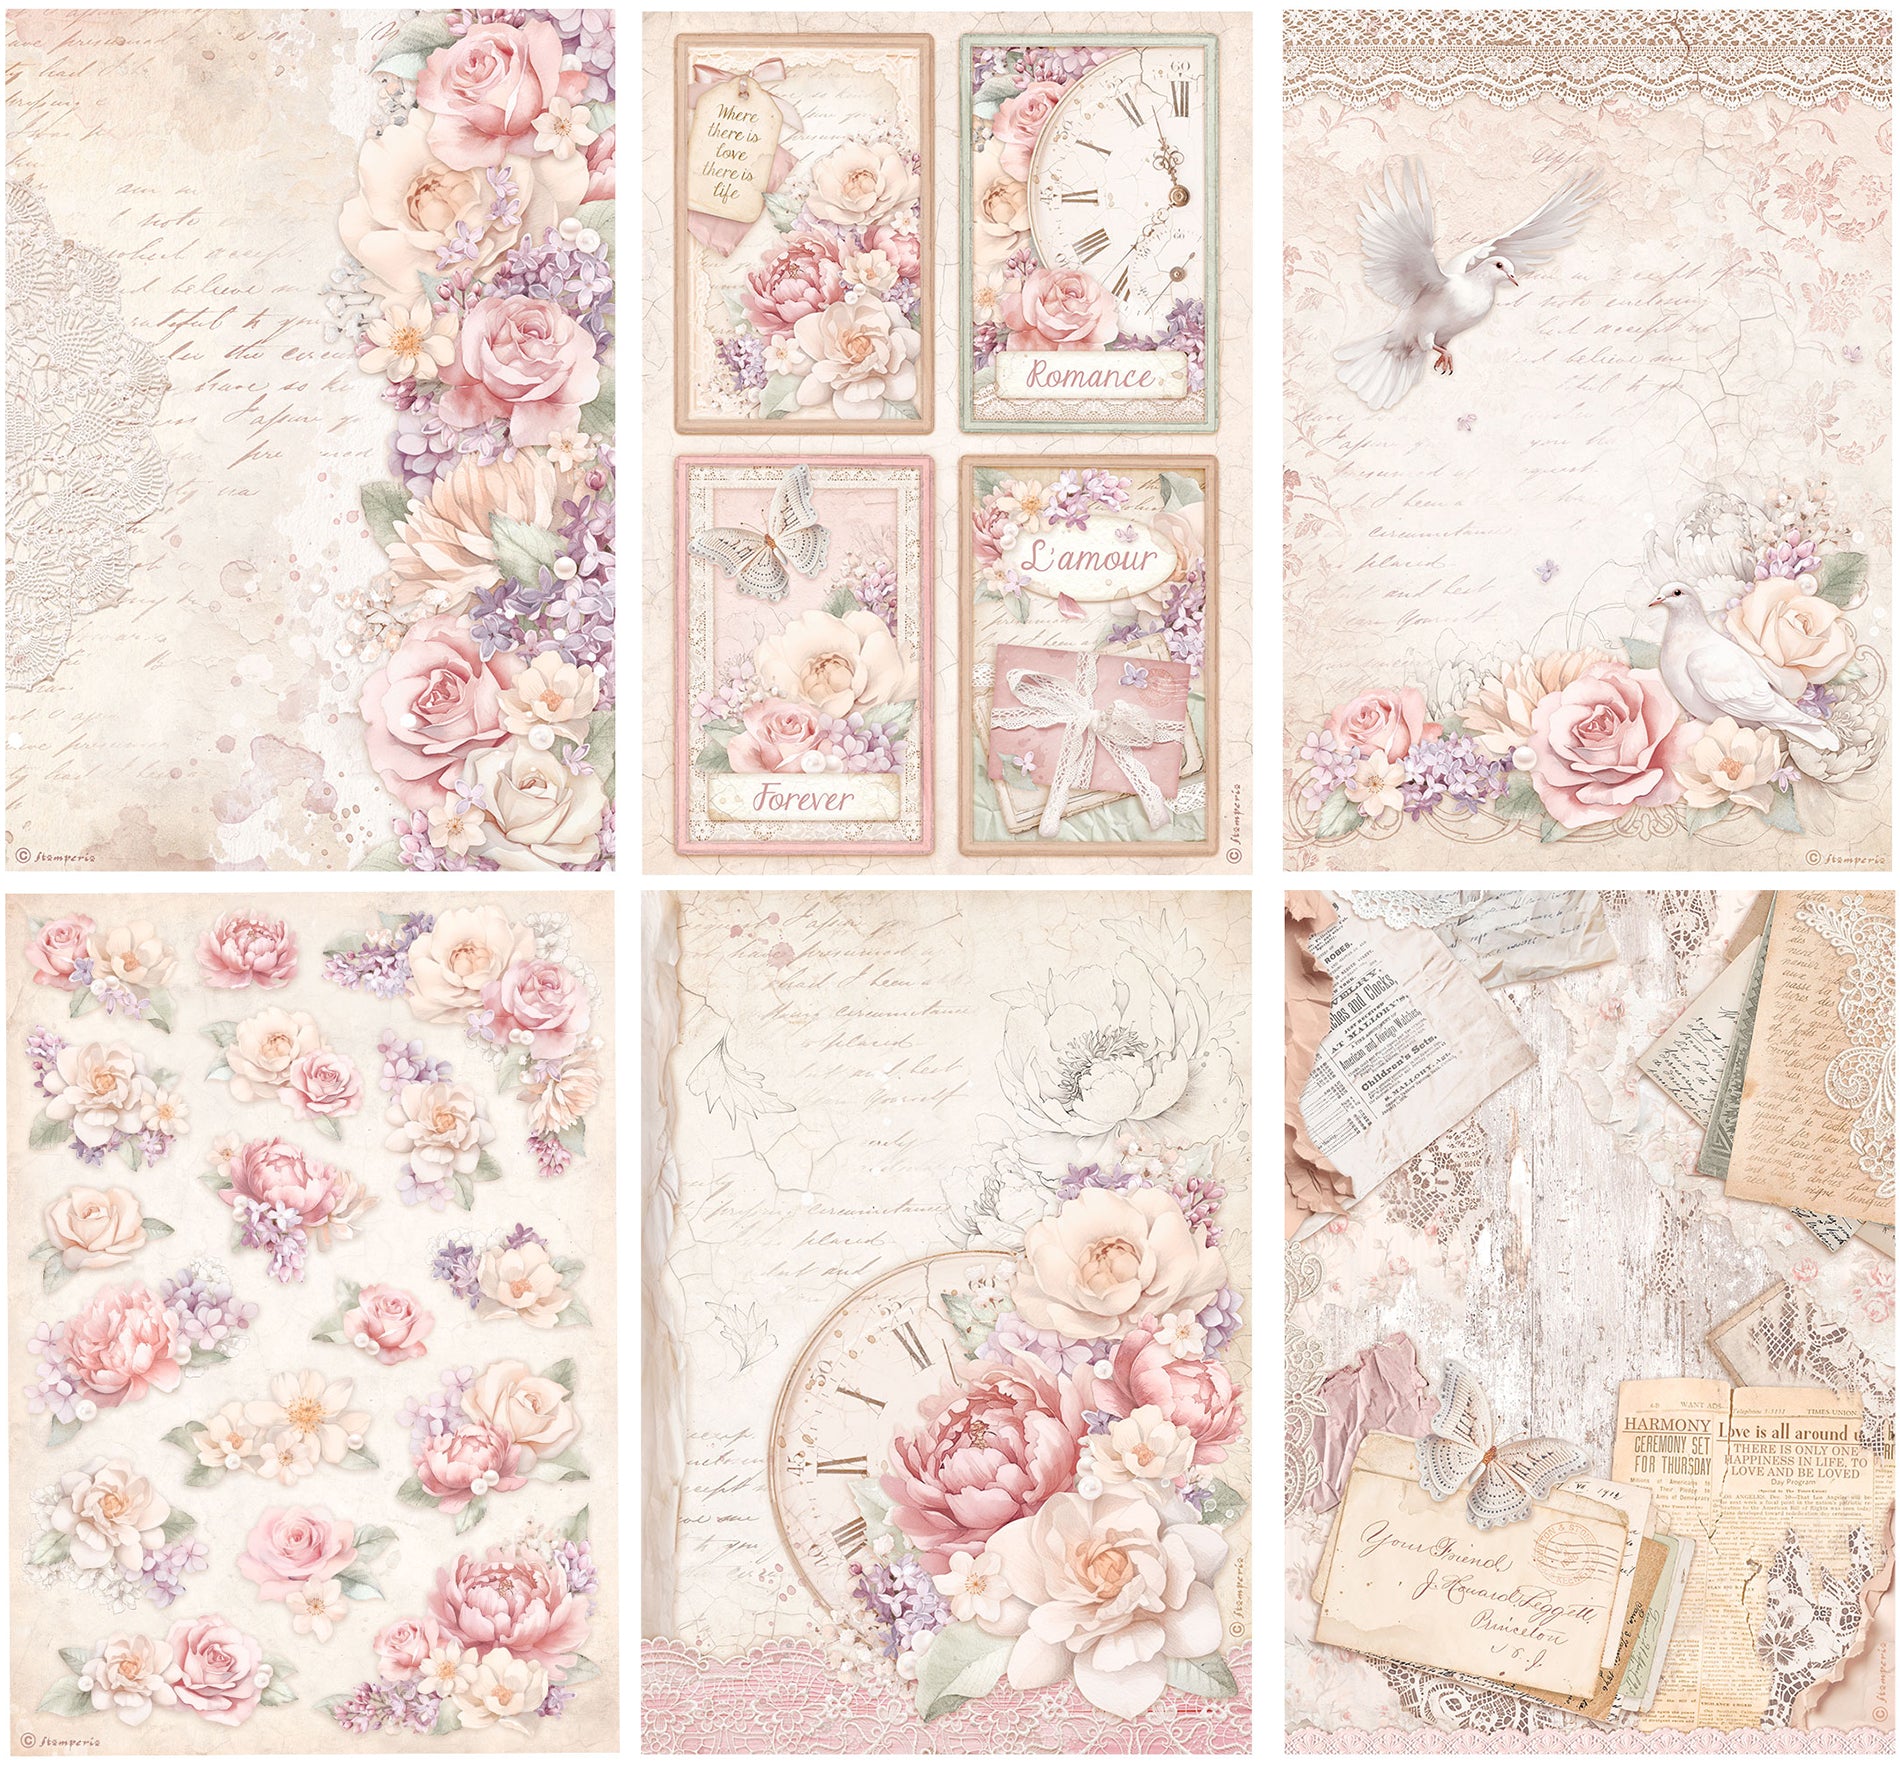 Stamperia Romance Forever Washi Pad Sheets A5 sbw02